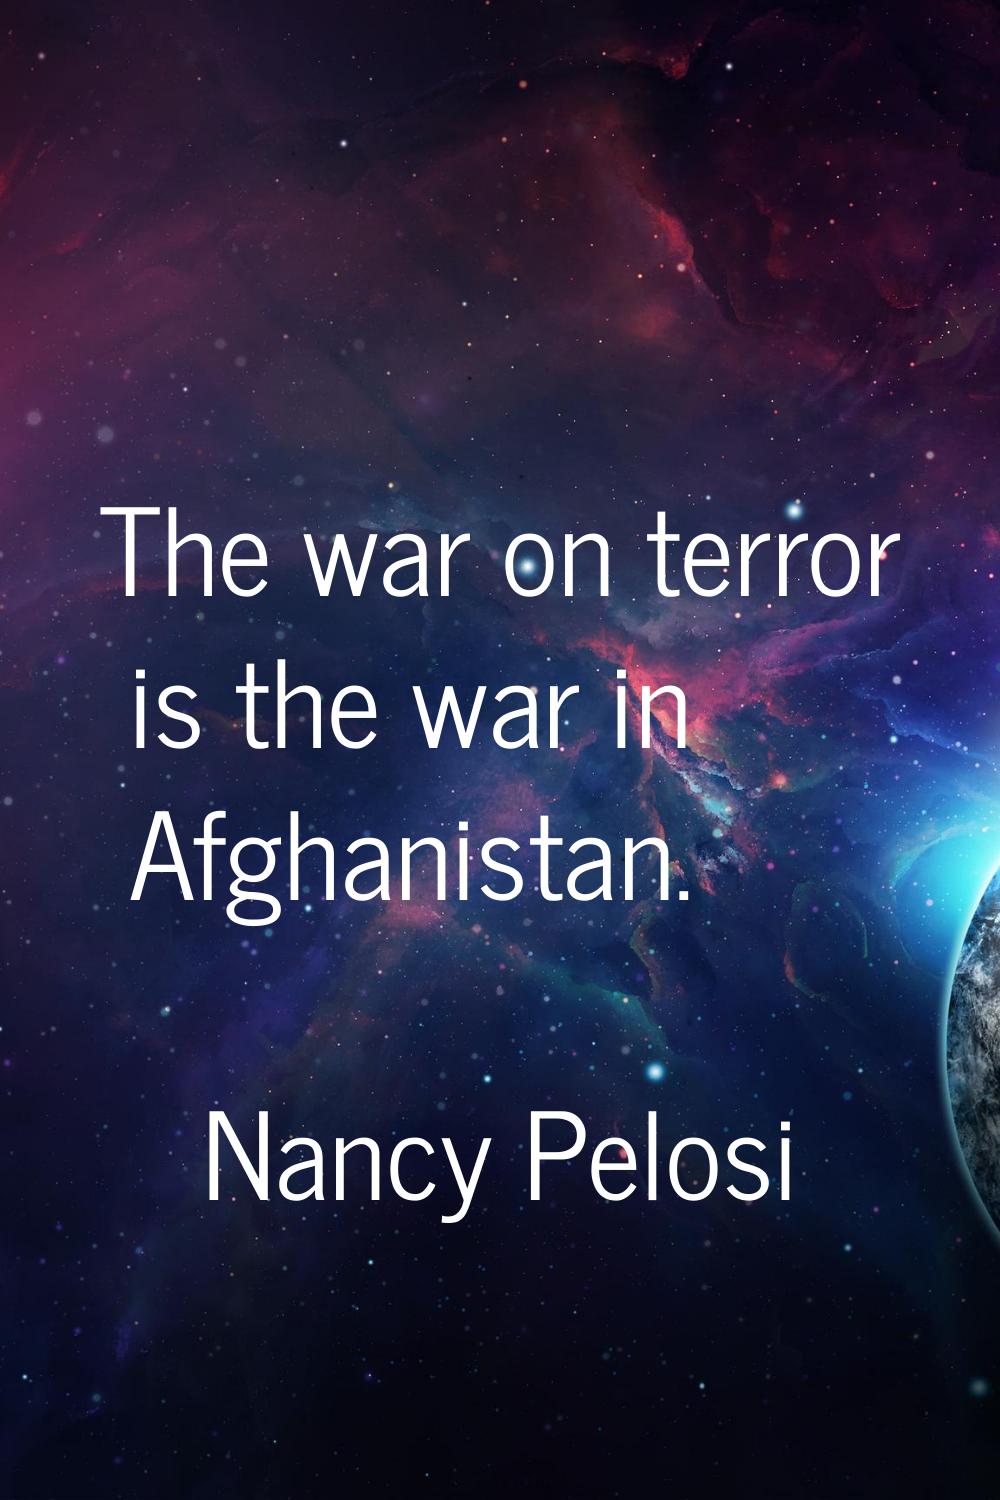 The war on terror is the war in Afghanistan.